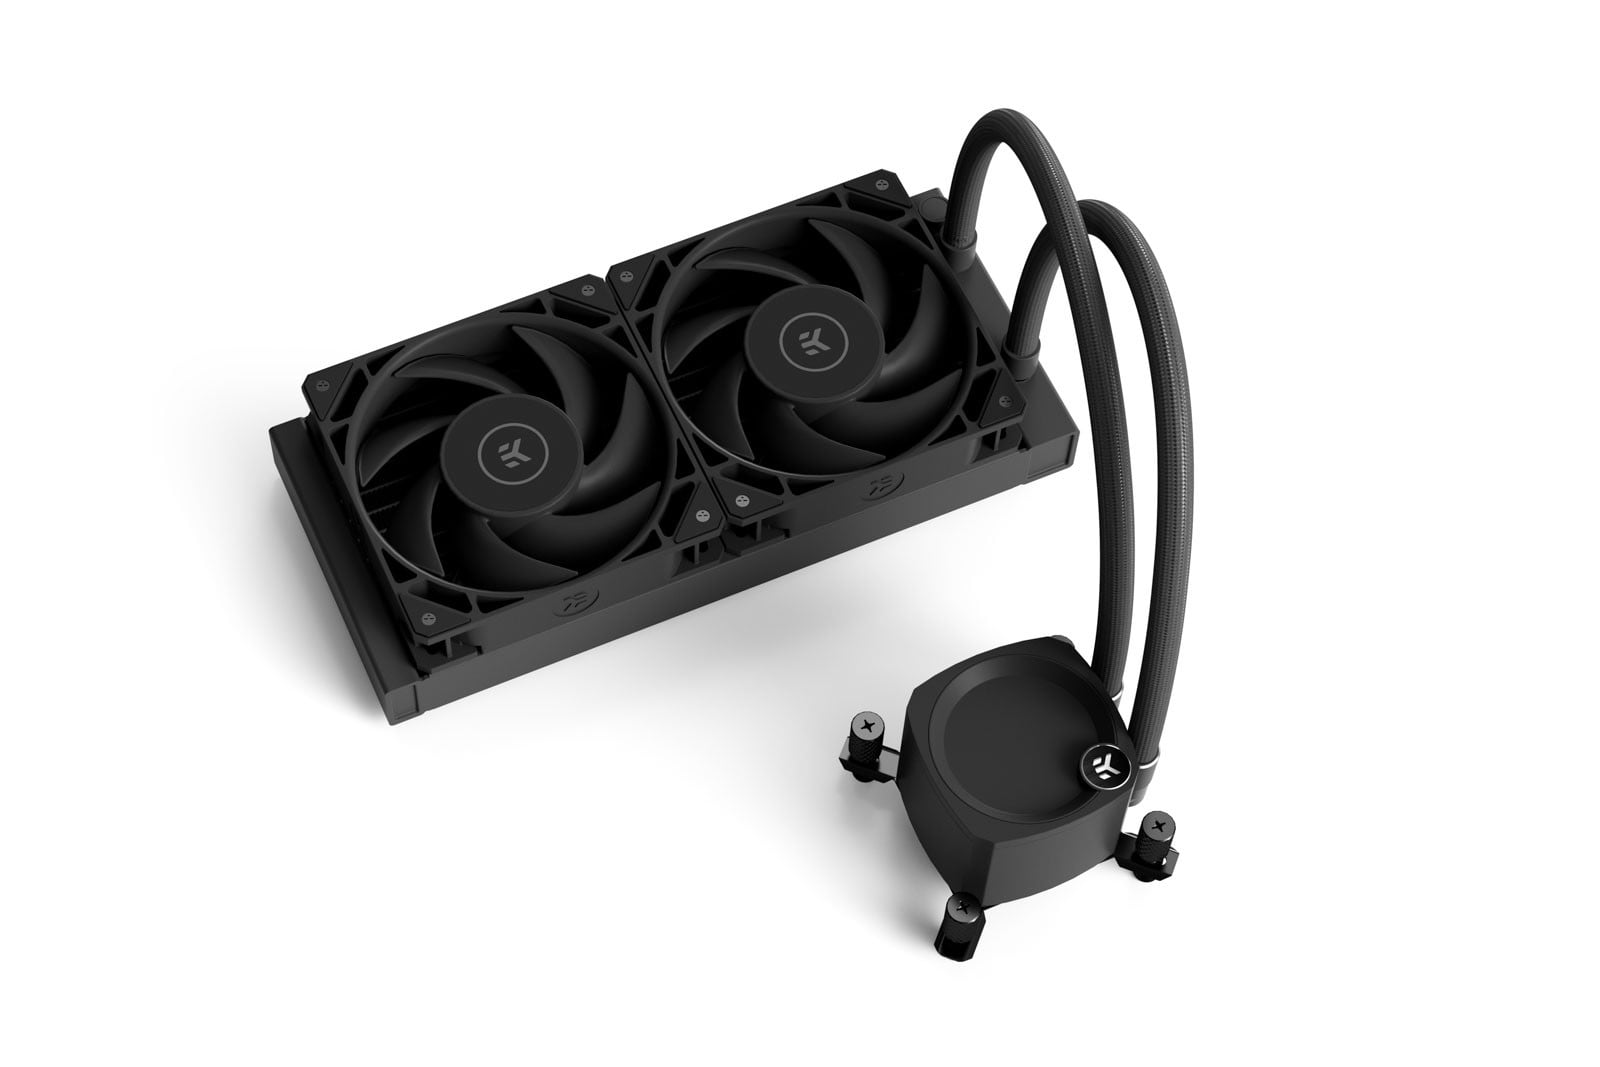 Intel's liquid CPU cooler: Is water worth the cost?